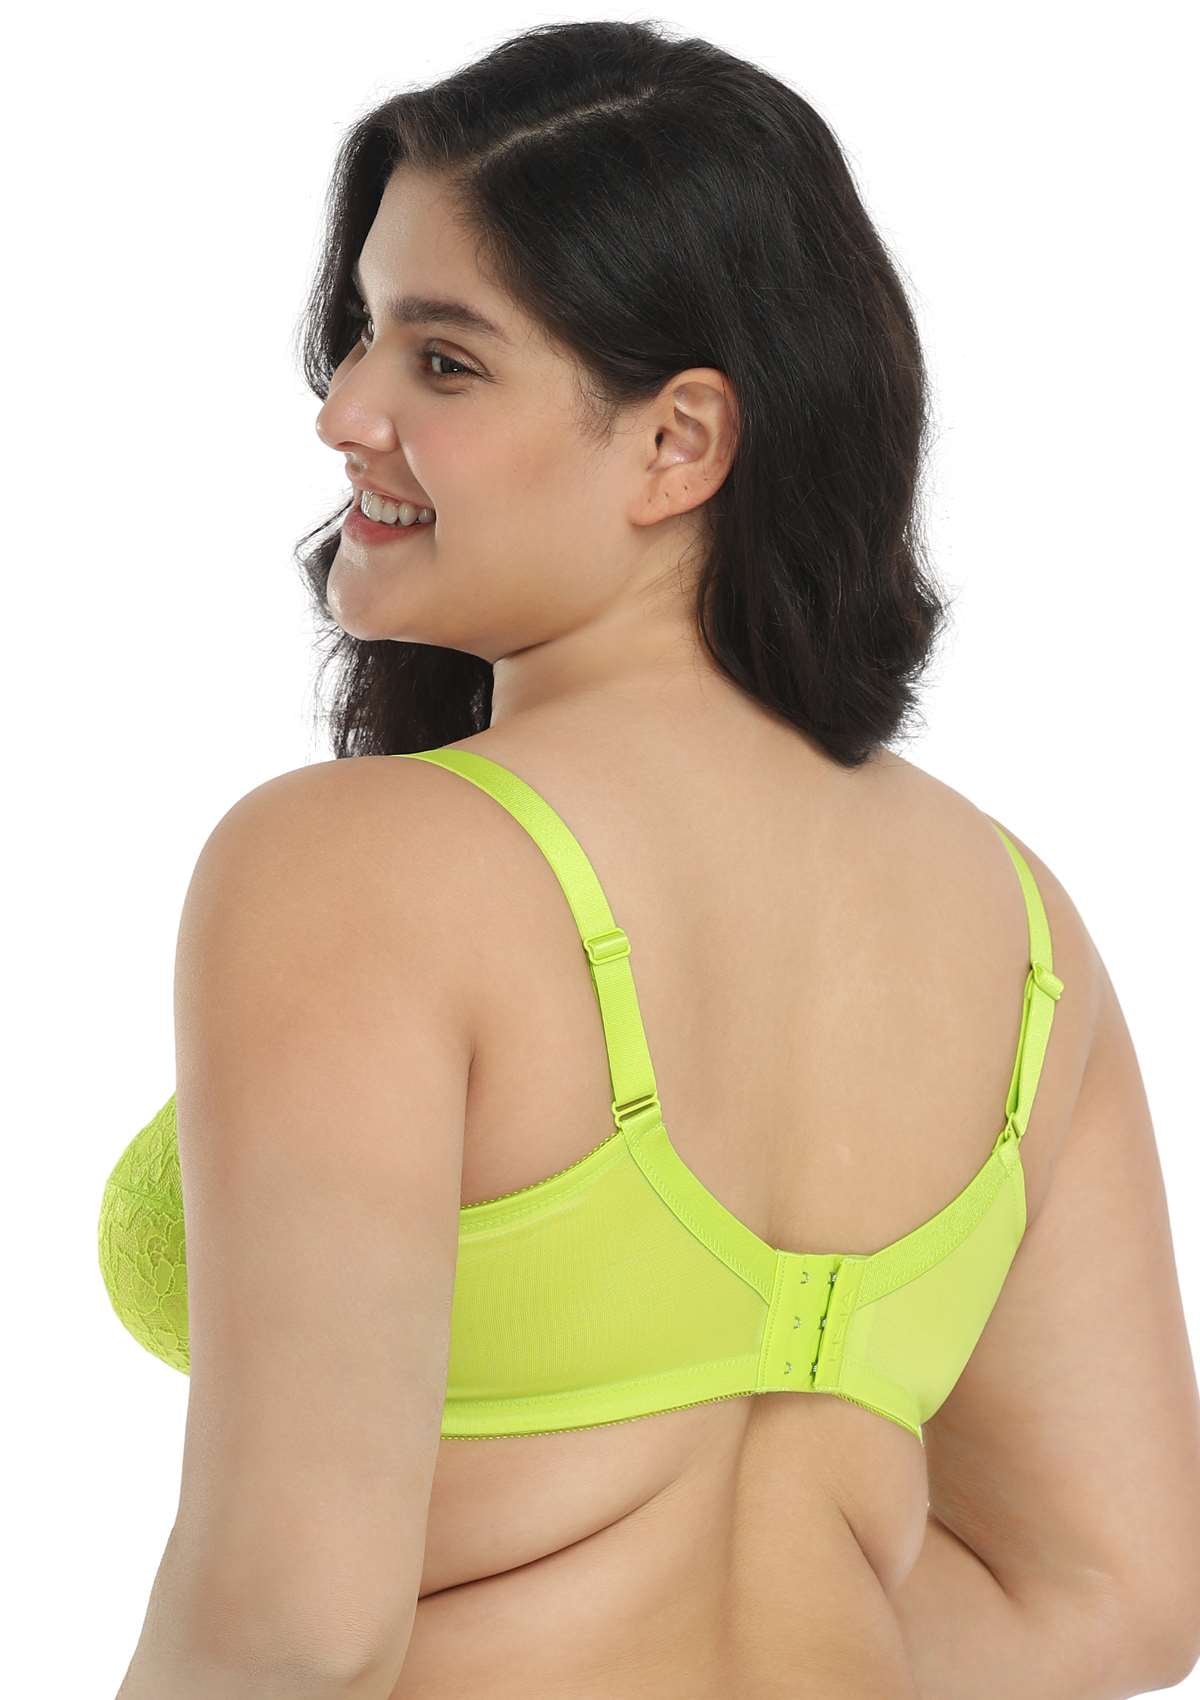 HSIA Enchante Full Cup Minimizing Bra: Supportive Unlined Lace Bra - Lime Green / 44 / DD/E